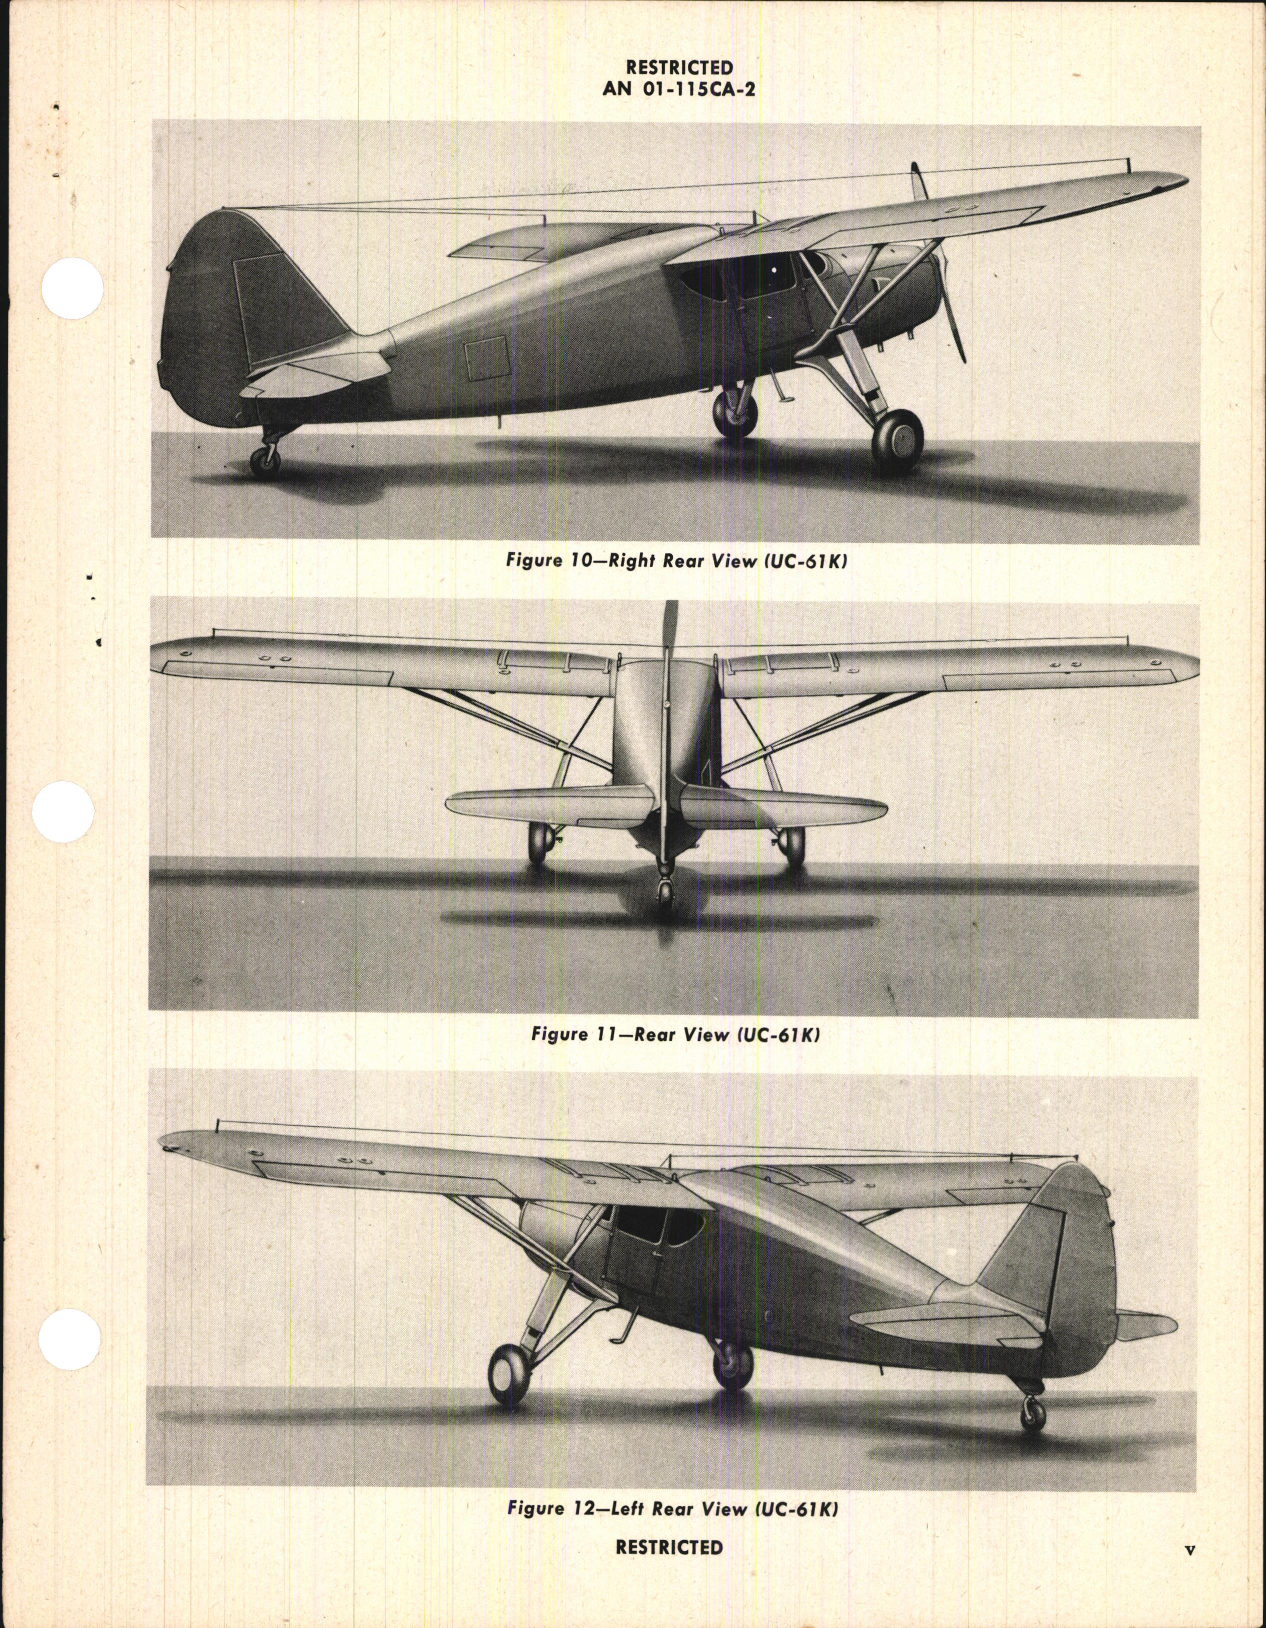 Sample page 7 from AirCorps Library document: Erection and Maintenance Instructions for UC-61, UC-61A, UC-61K, GK-1